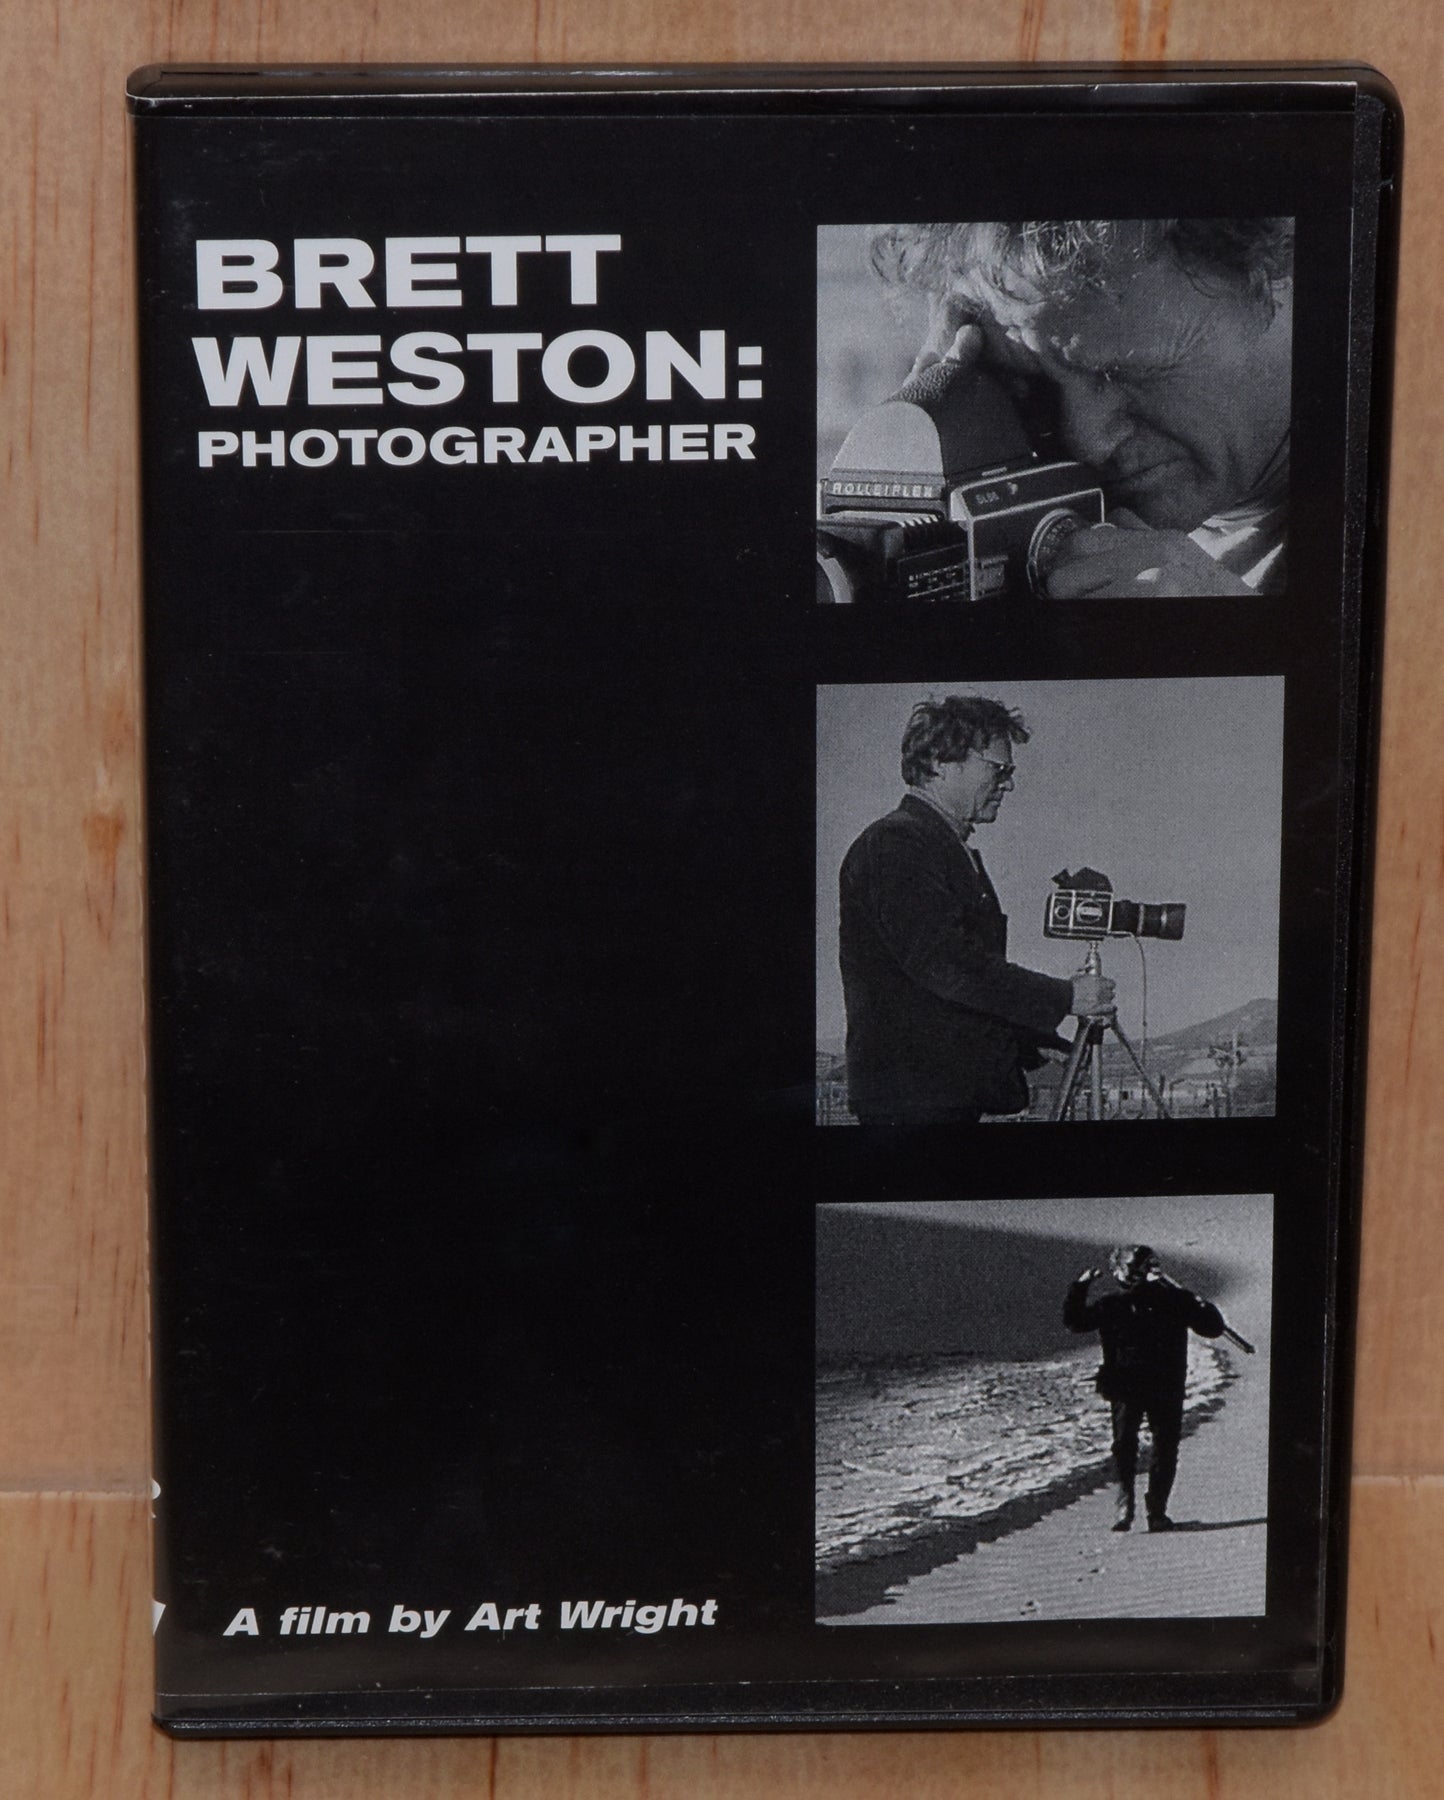 Brett Weston Photographer DVD A Film by Art Wright + 892 Digitized Images - New